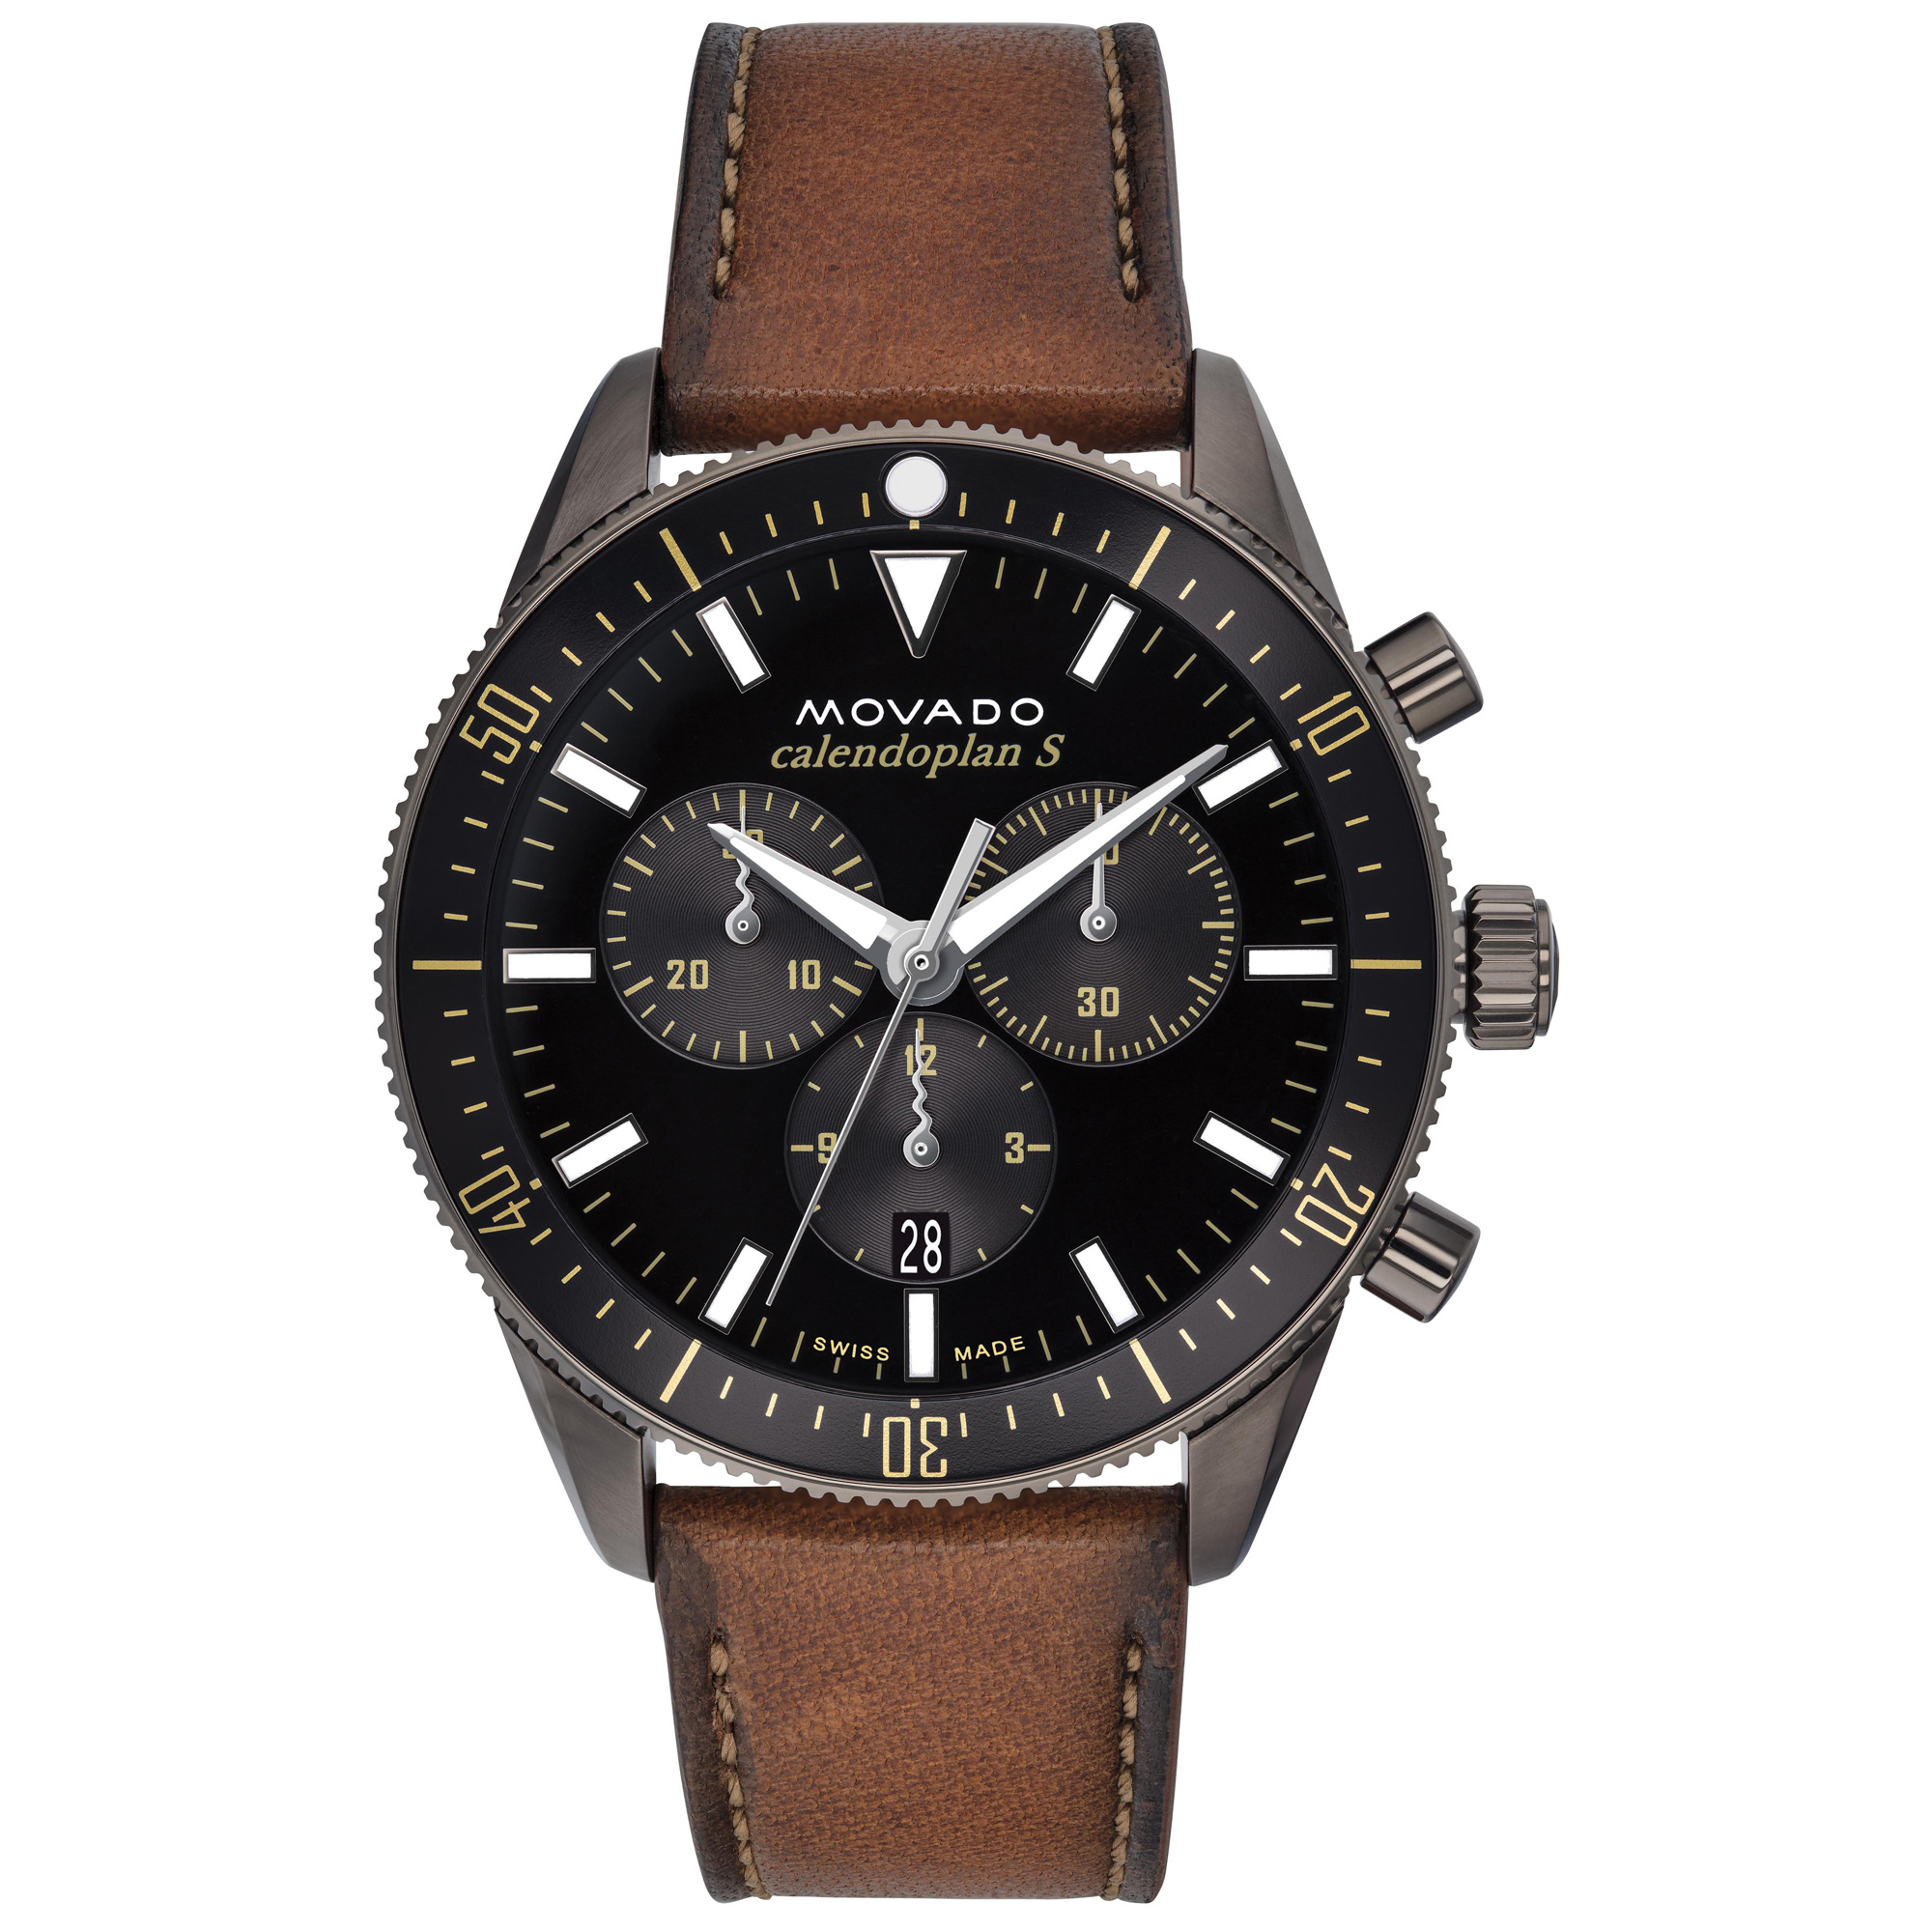 Heritage Series Calendoplan S Chronograph Black Dial and Brown Leather Strap Watch | 42mm | - Movado 3650123